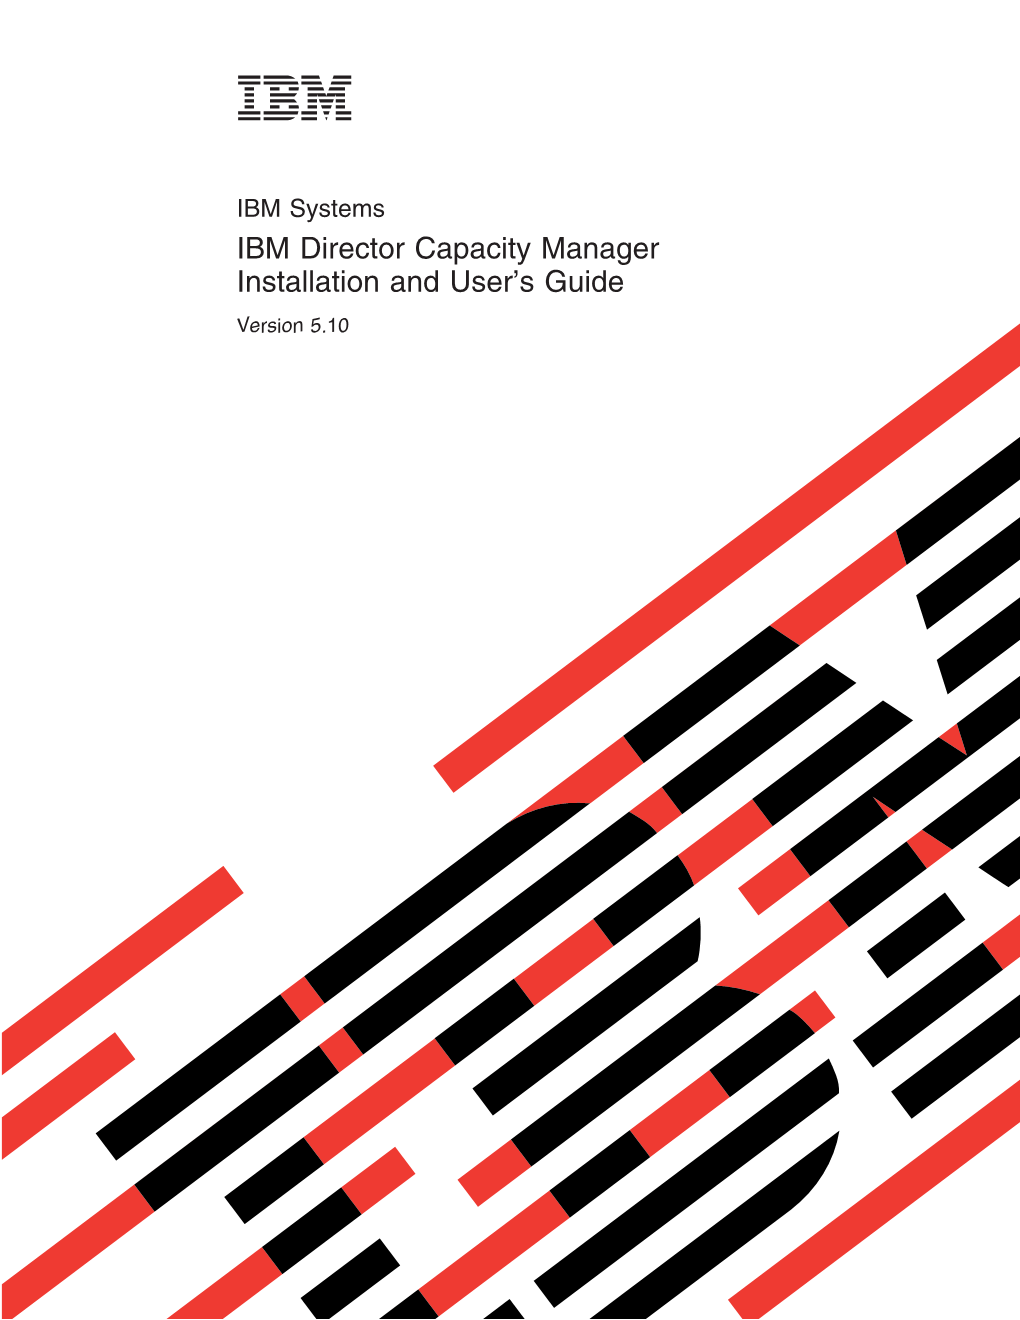 IBM Director Capacity Manager Installation and User's Guide